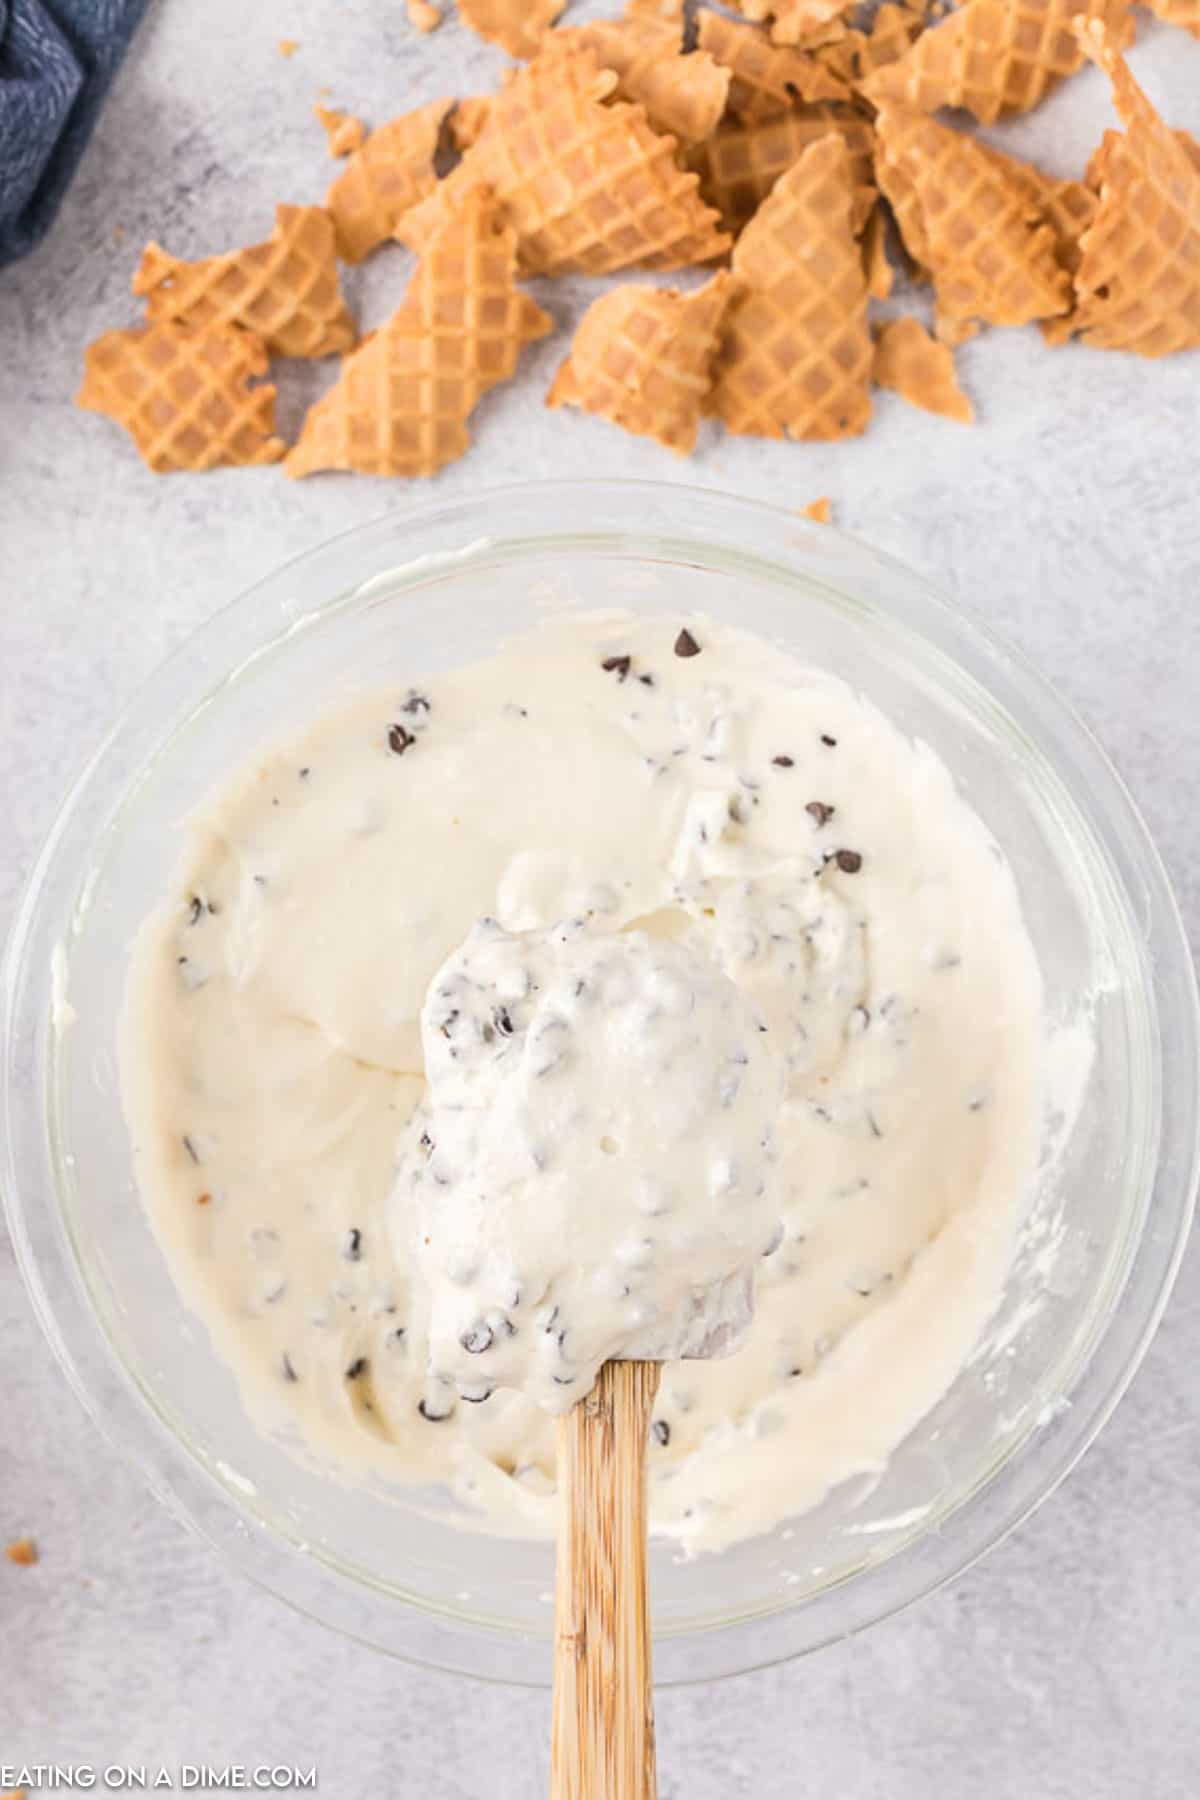 Chocolate chips mixed into the dip batter with a serving on a wooden spoon and cone chips on the side